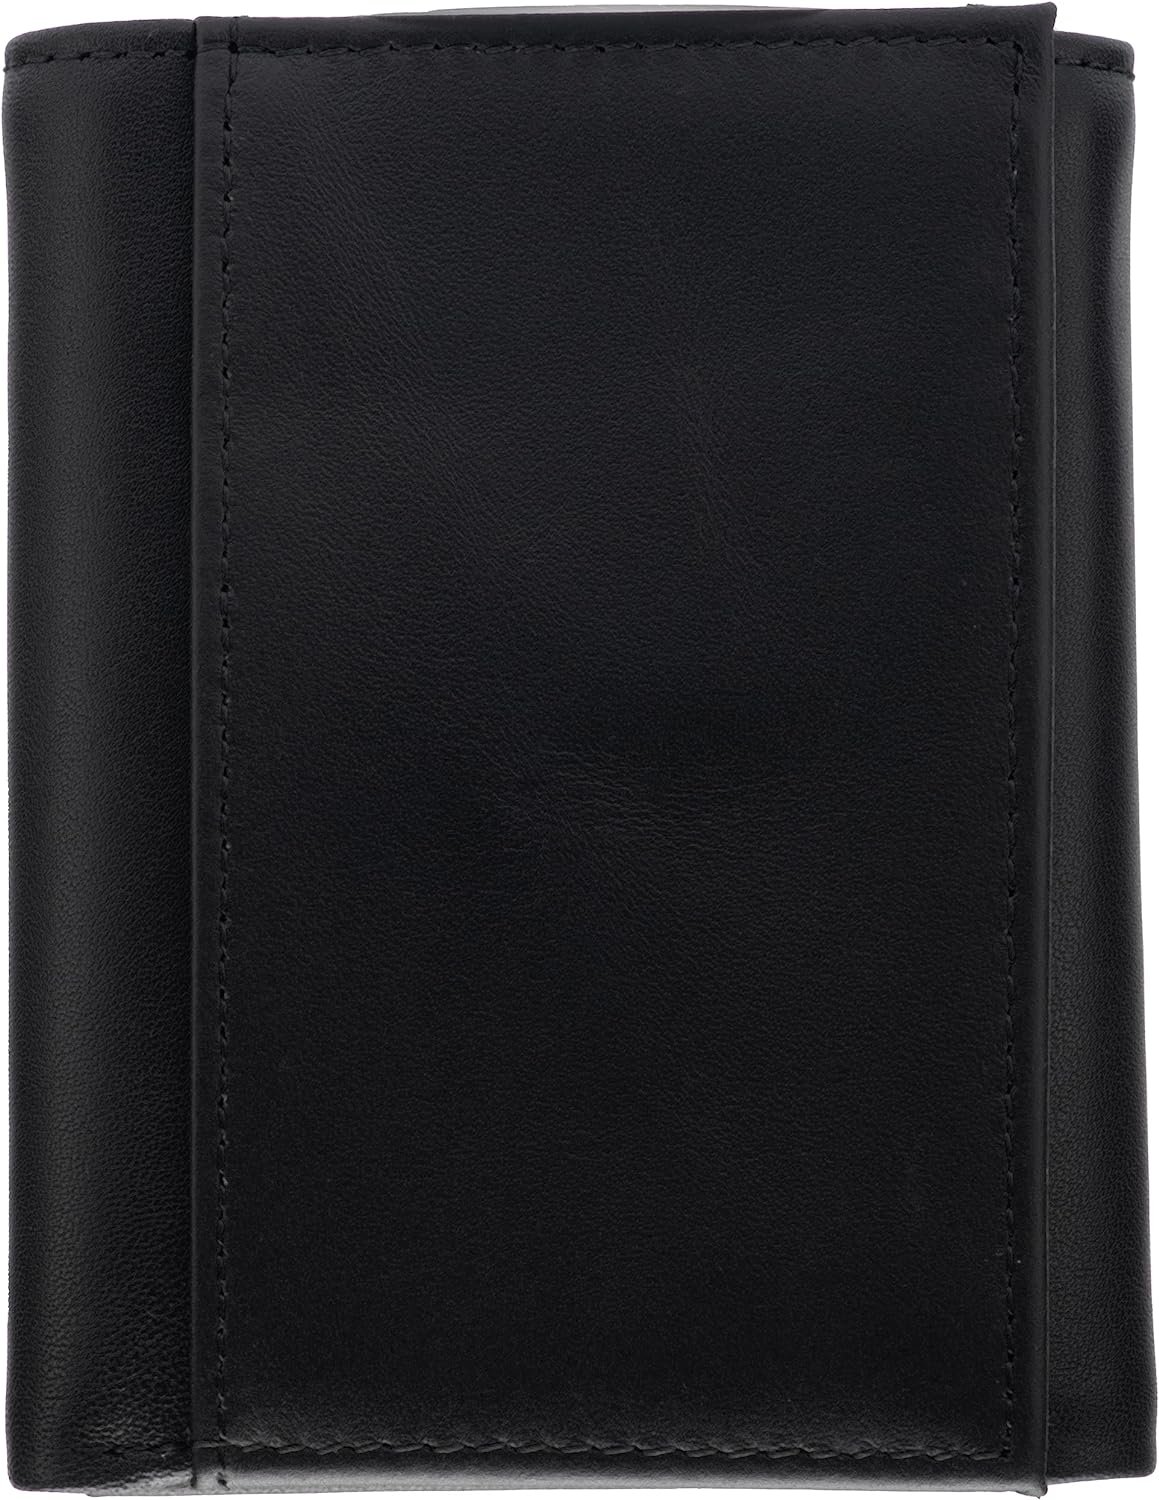 Trifold Leather Wallet for Men with RFID Blocking Review